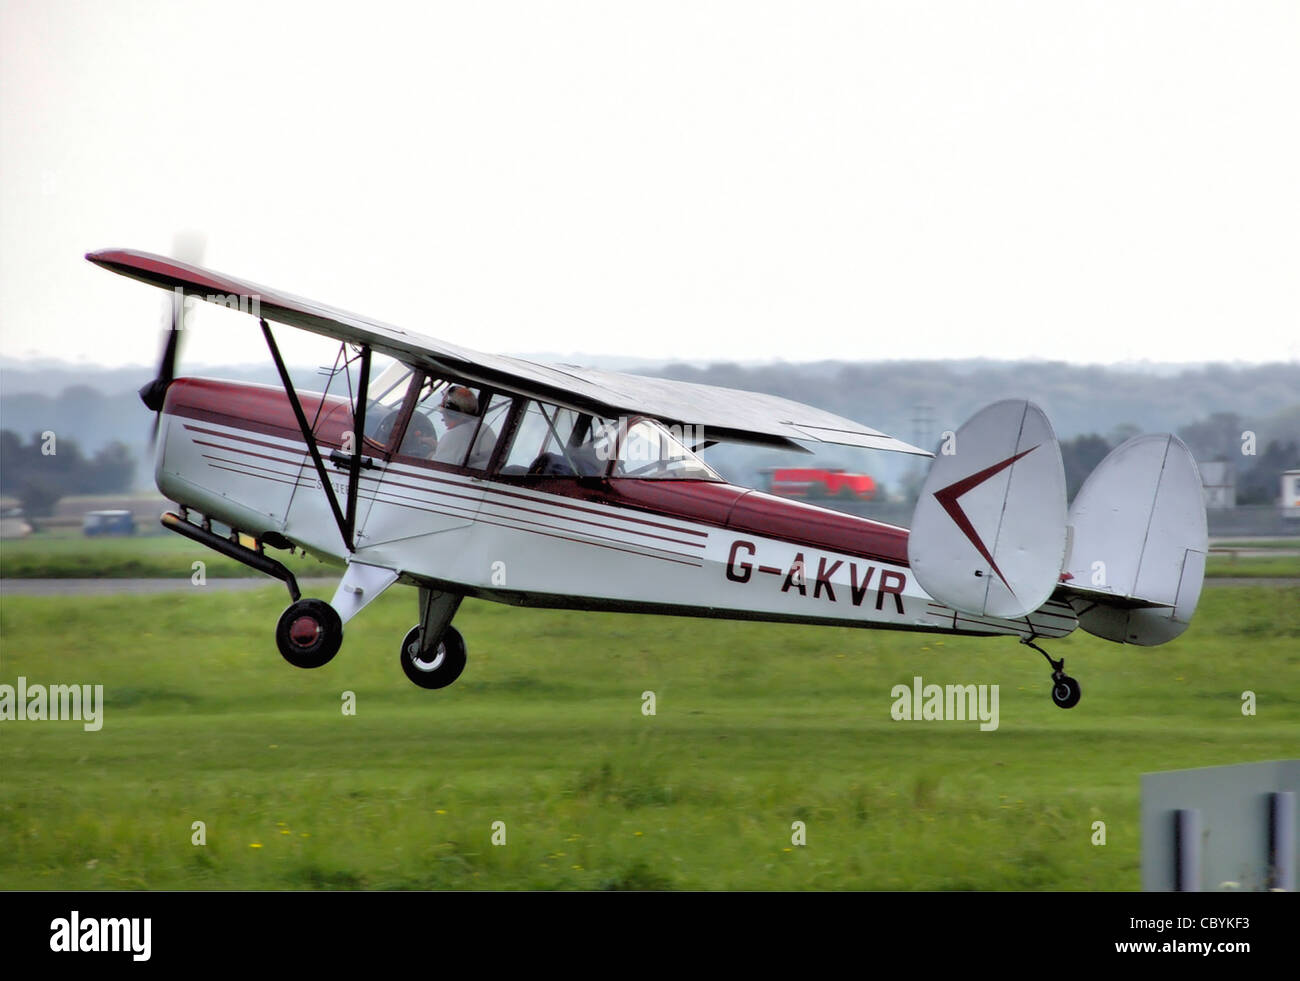 Chrislea CH.3 Super Ace Series 4 Skyjeep (G-AKVR) takes off from Kemble Airport, Gloucestershire, England. Stock Photo